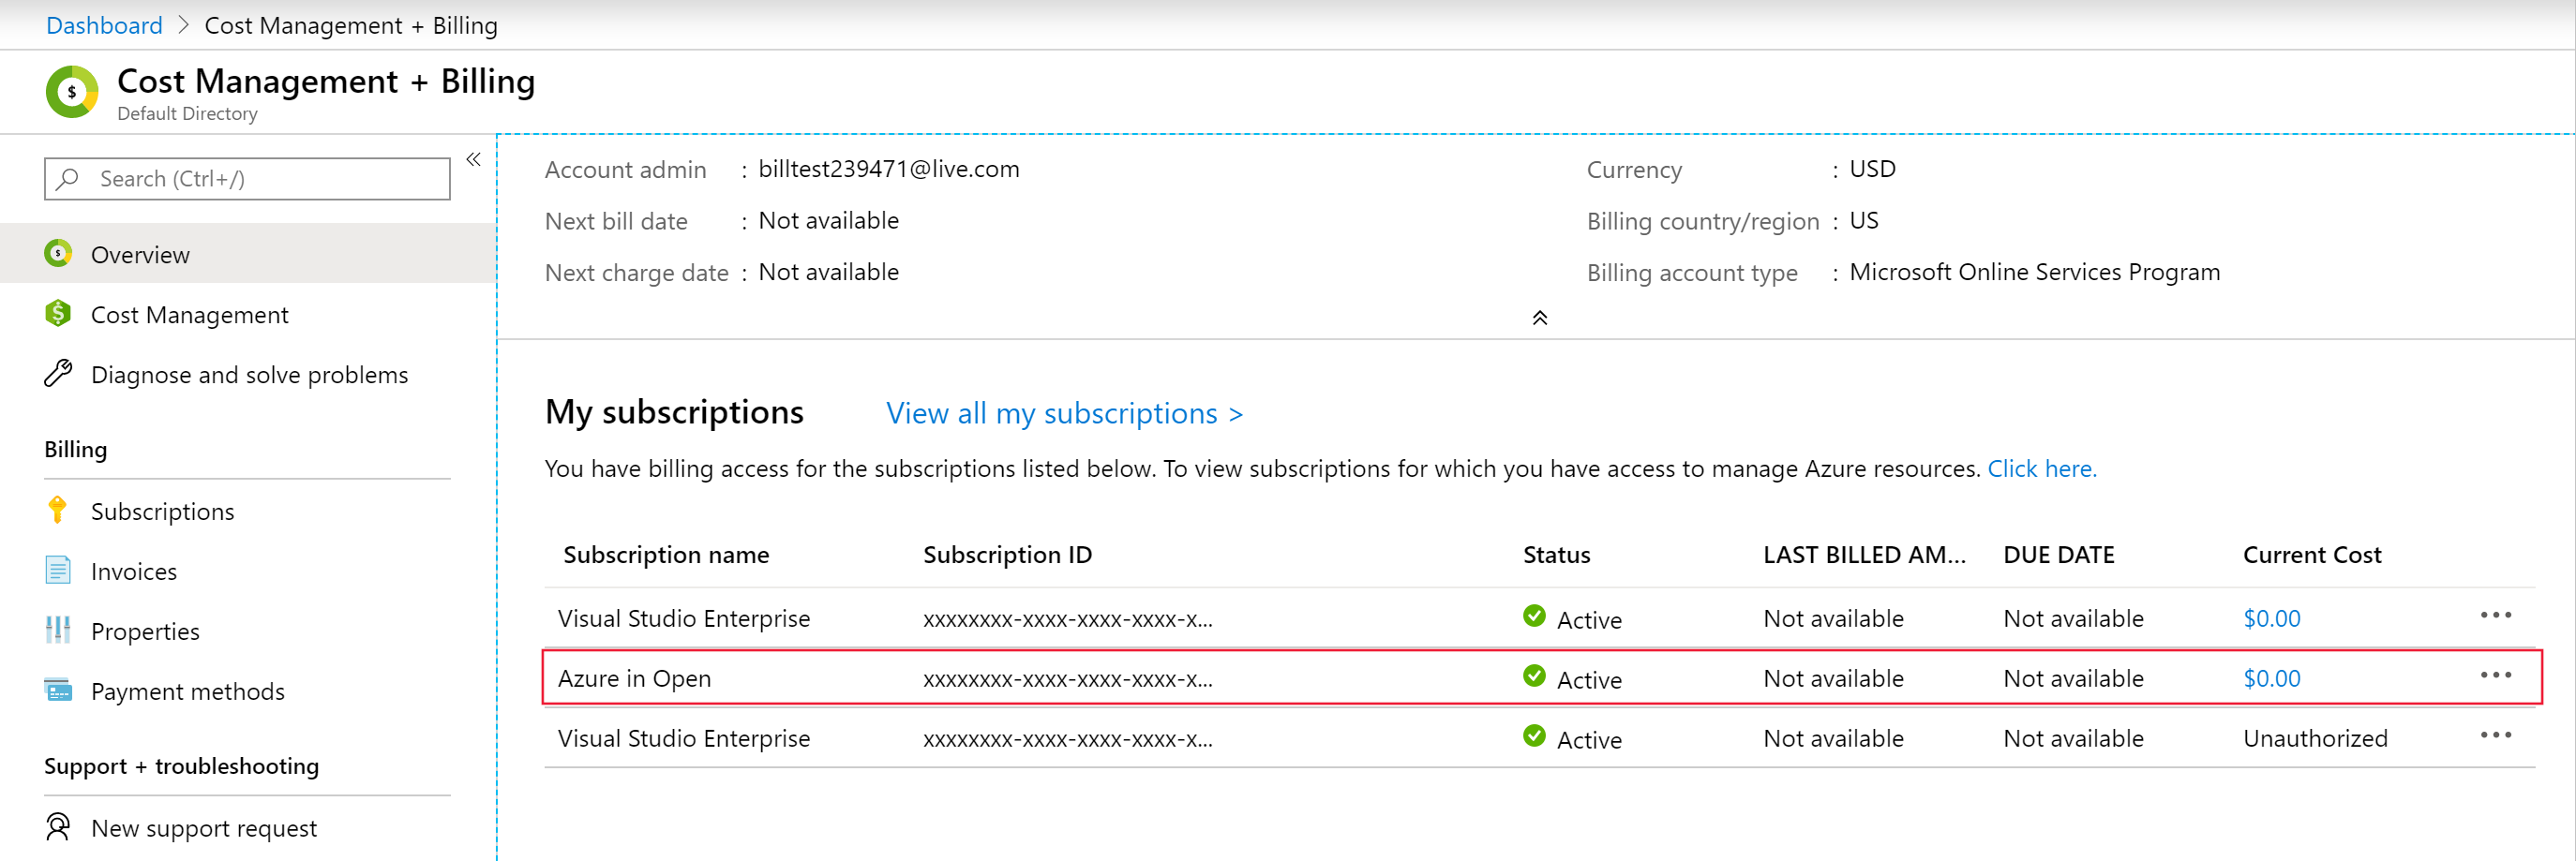 Screenshot shows the My subscriptions area where you can select your Azure in Open subscription.